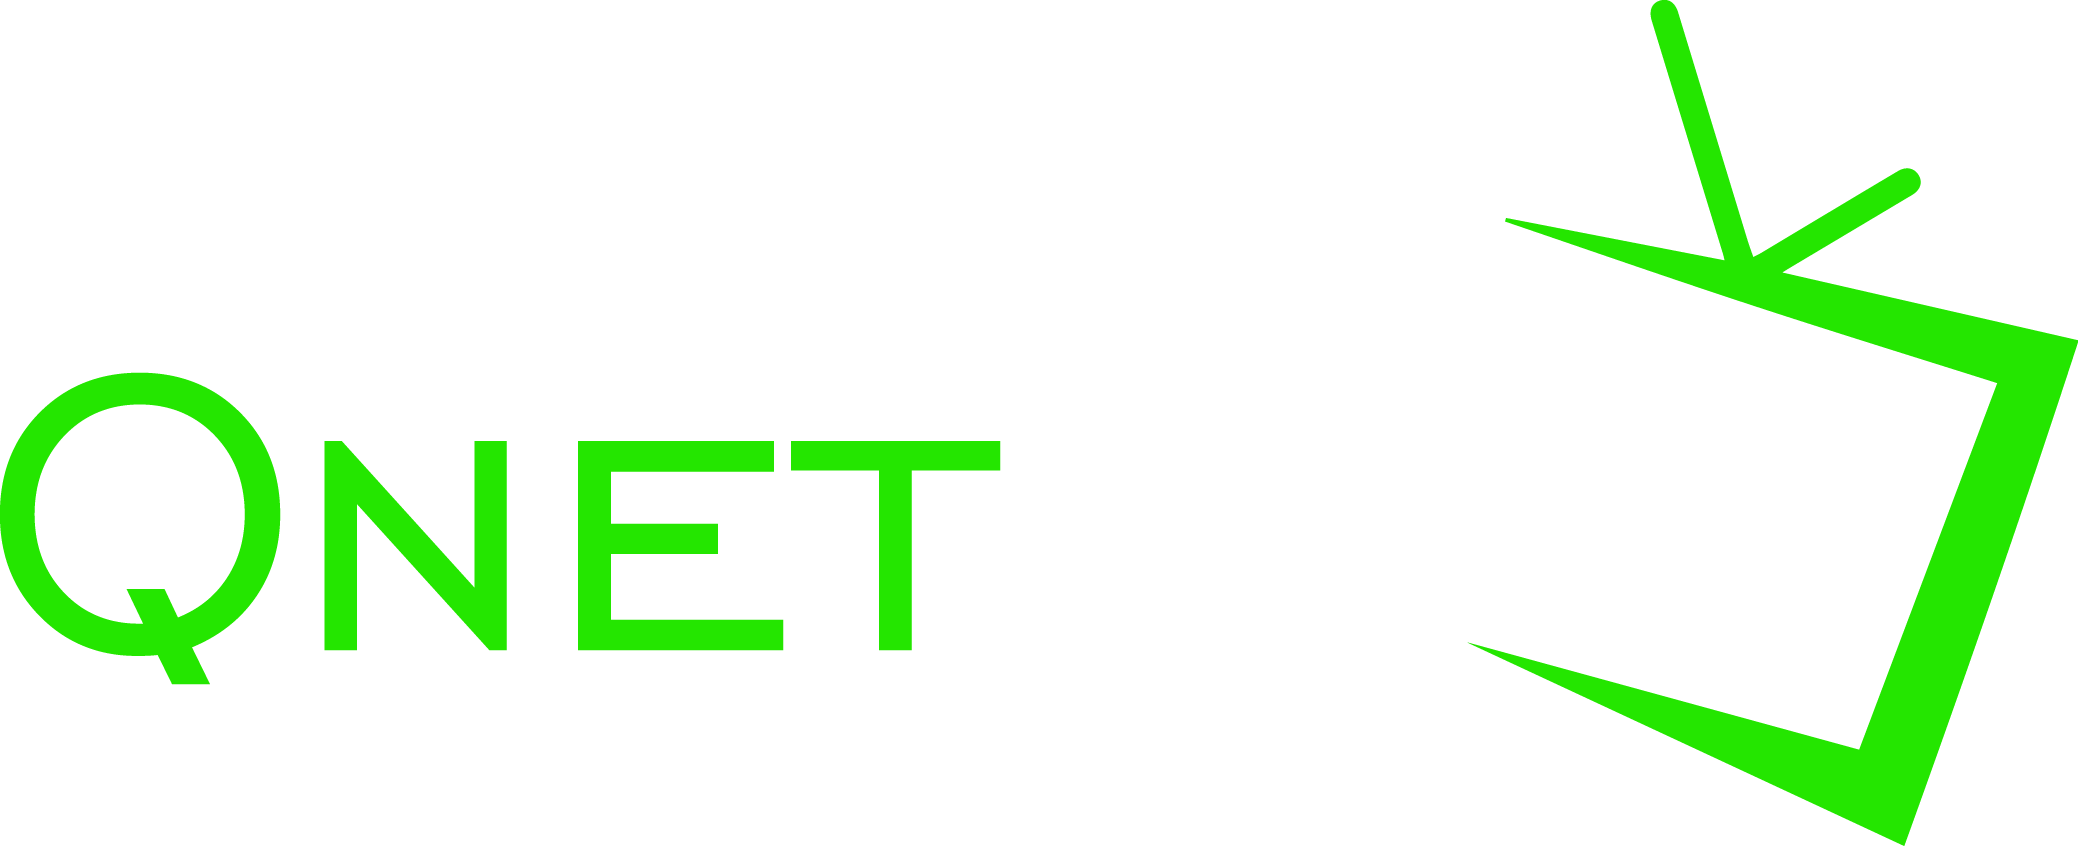 Qnet-IPTV | Worldwide IPTV Services and Products